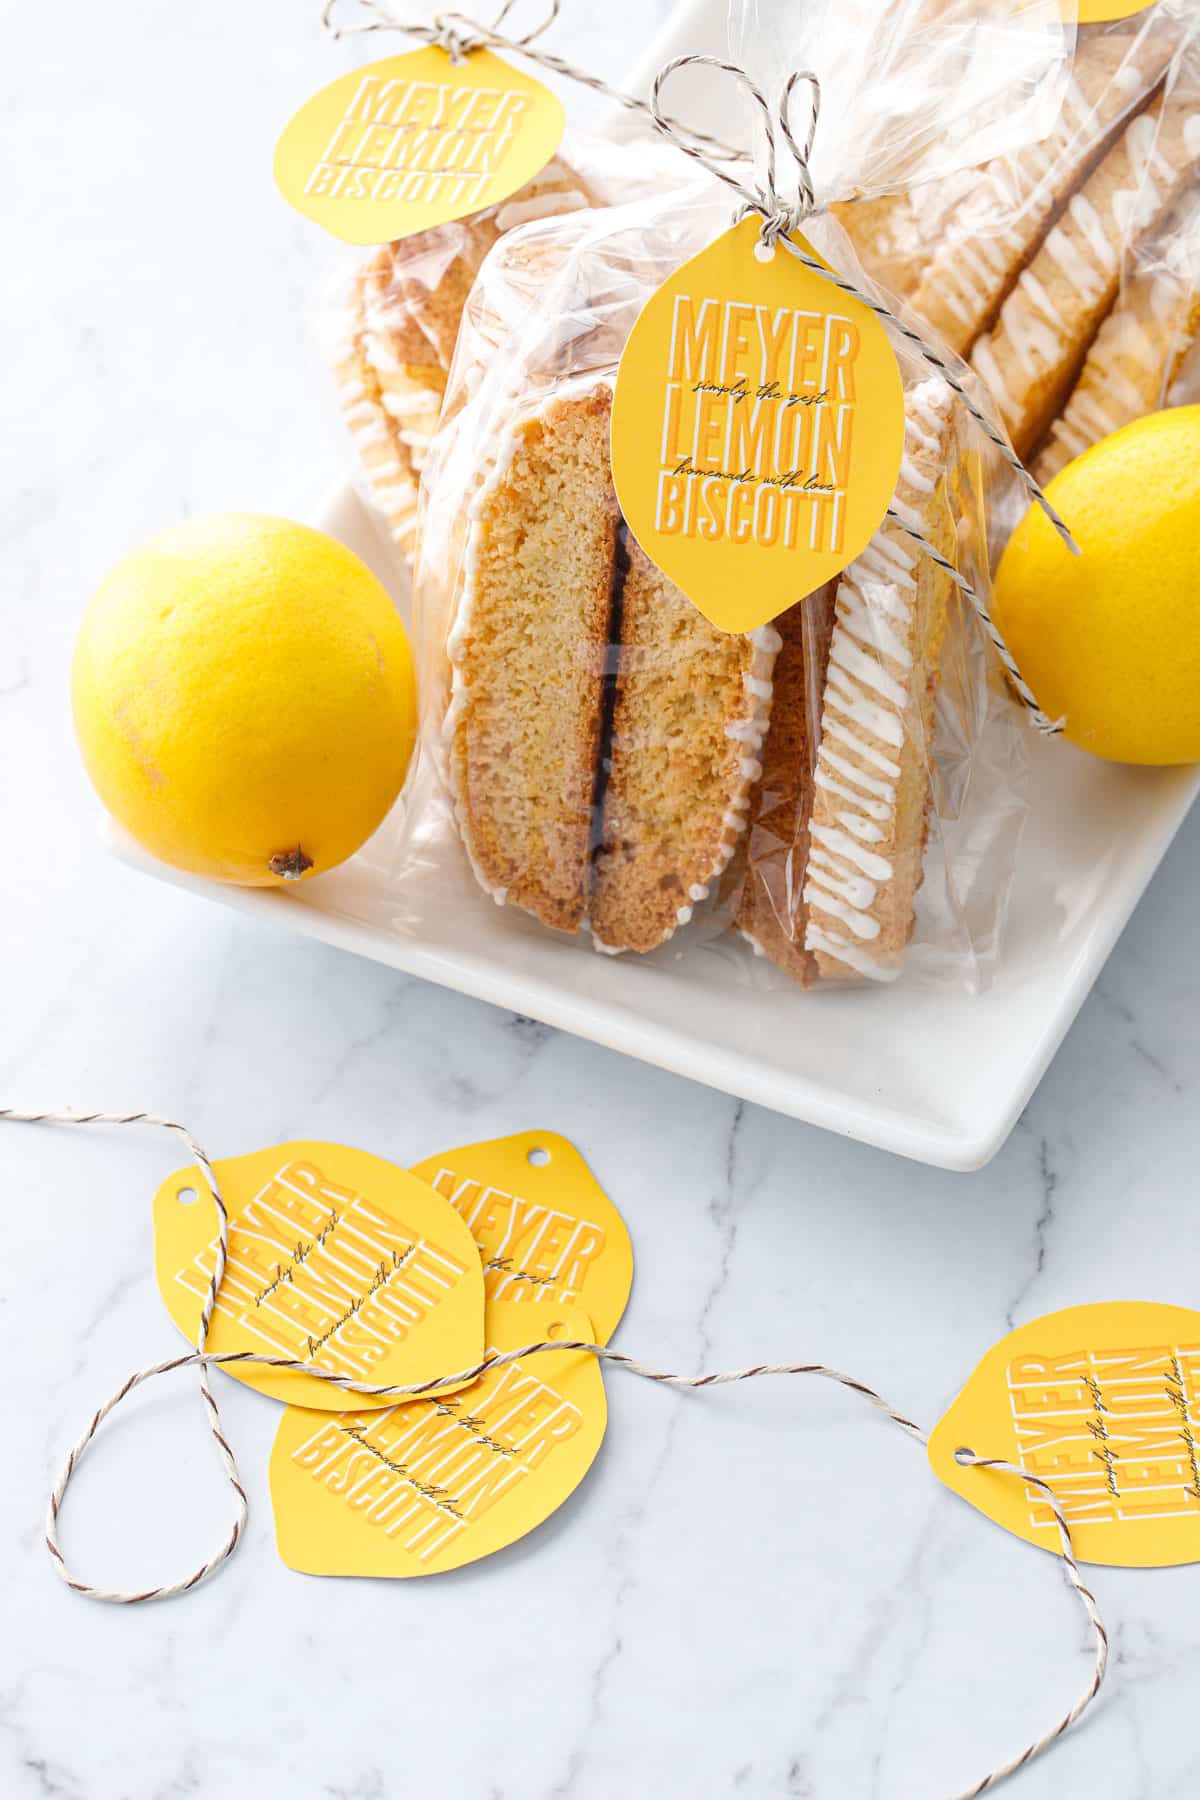 White plate with Meyer Lemon Biscotti in clear cello gift bags, tied with twine and a lemon-shaped gift tag, with a pile of tags in focus in the foreground.